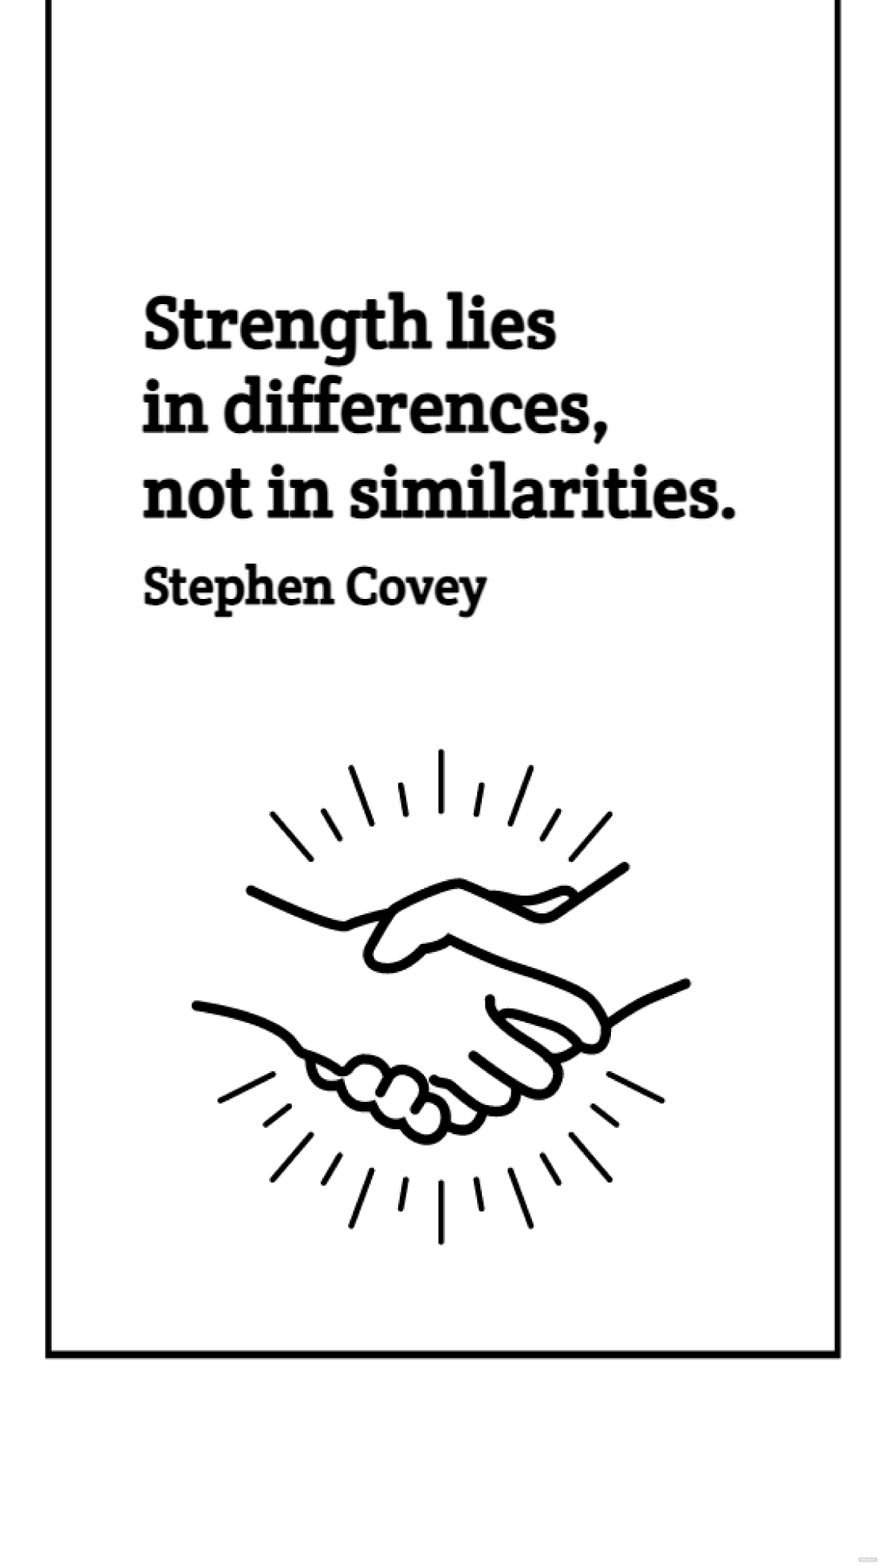 Stephen Covey - Strength lies in differences, not in similarities.